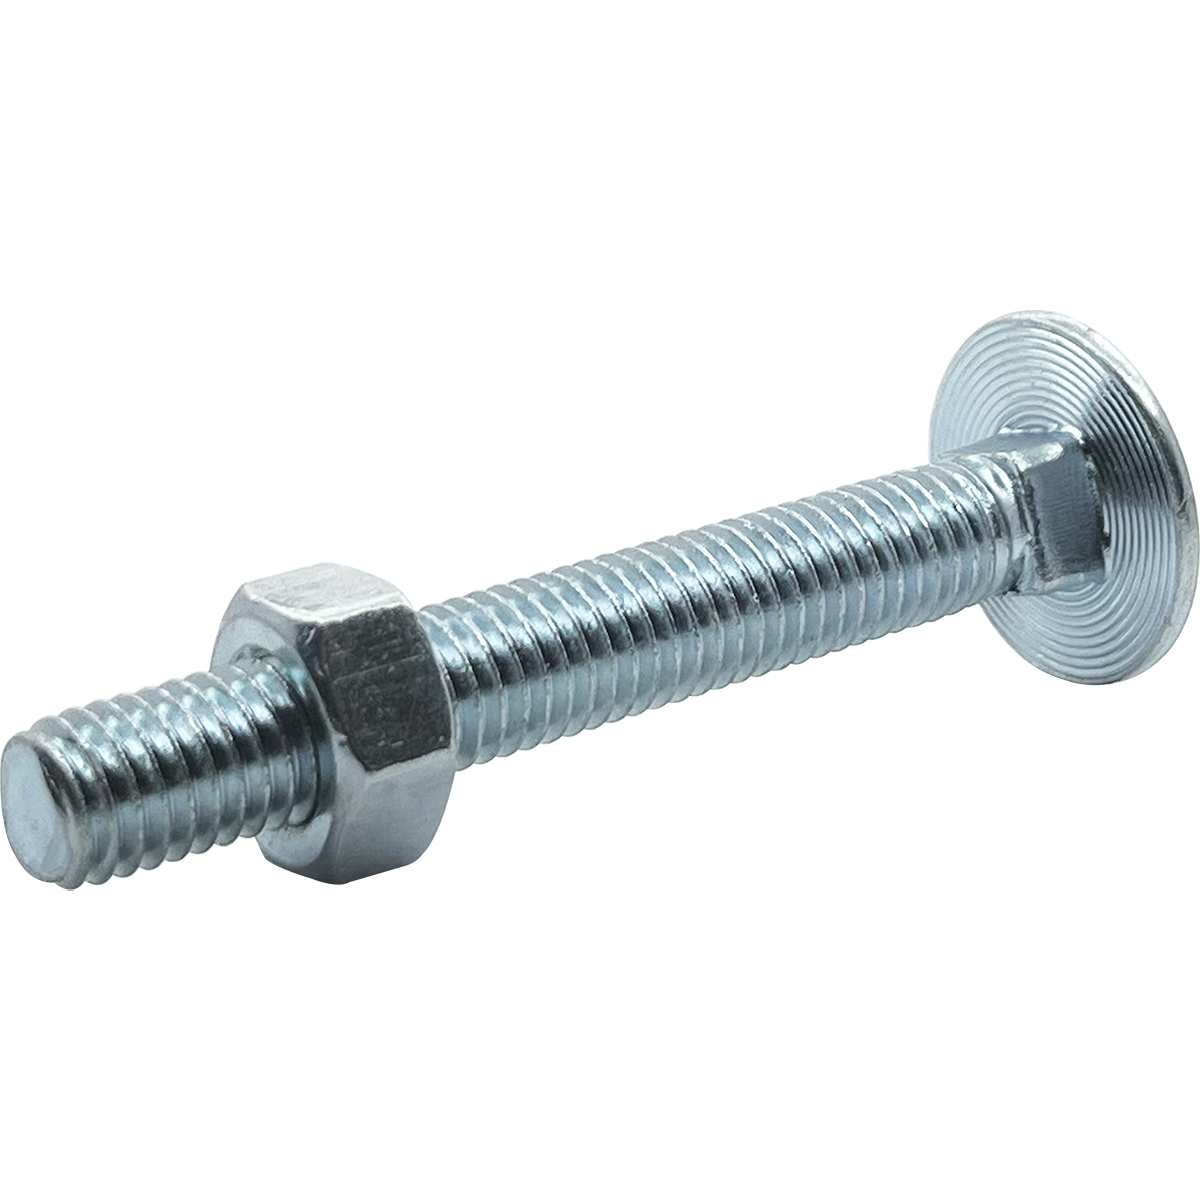 BZP cup square carriage bolts, known as coach bolts, are available at competitive prices, with a bolt supplied